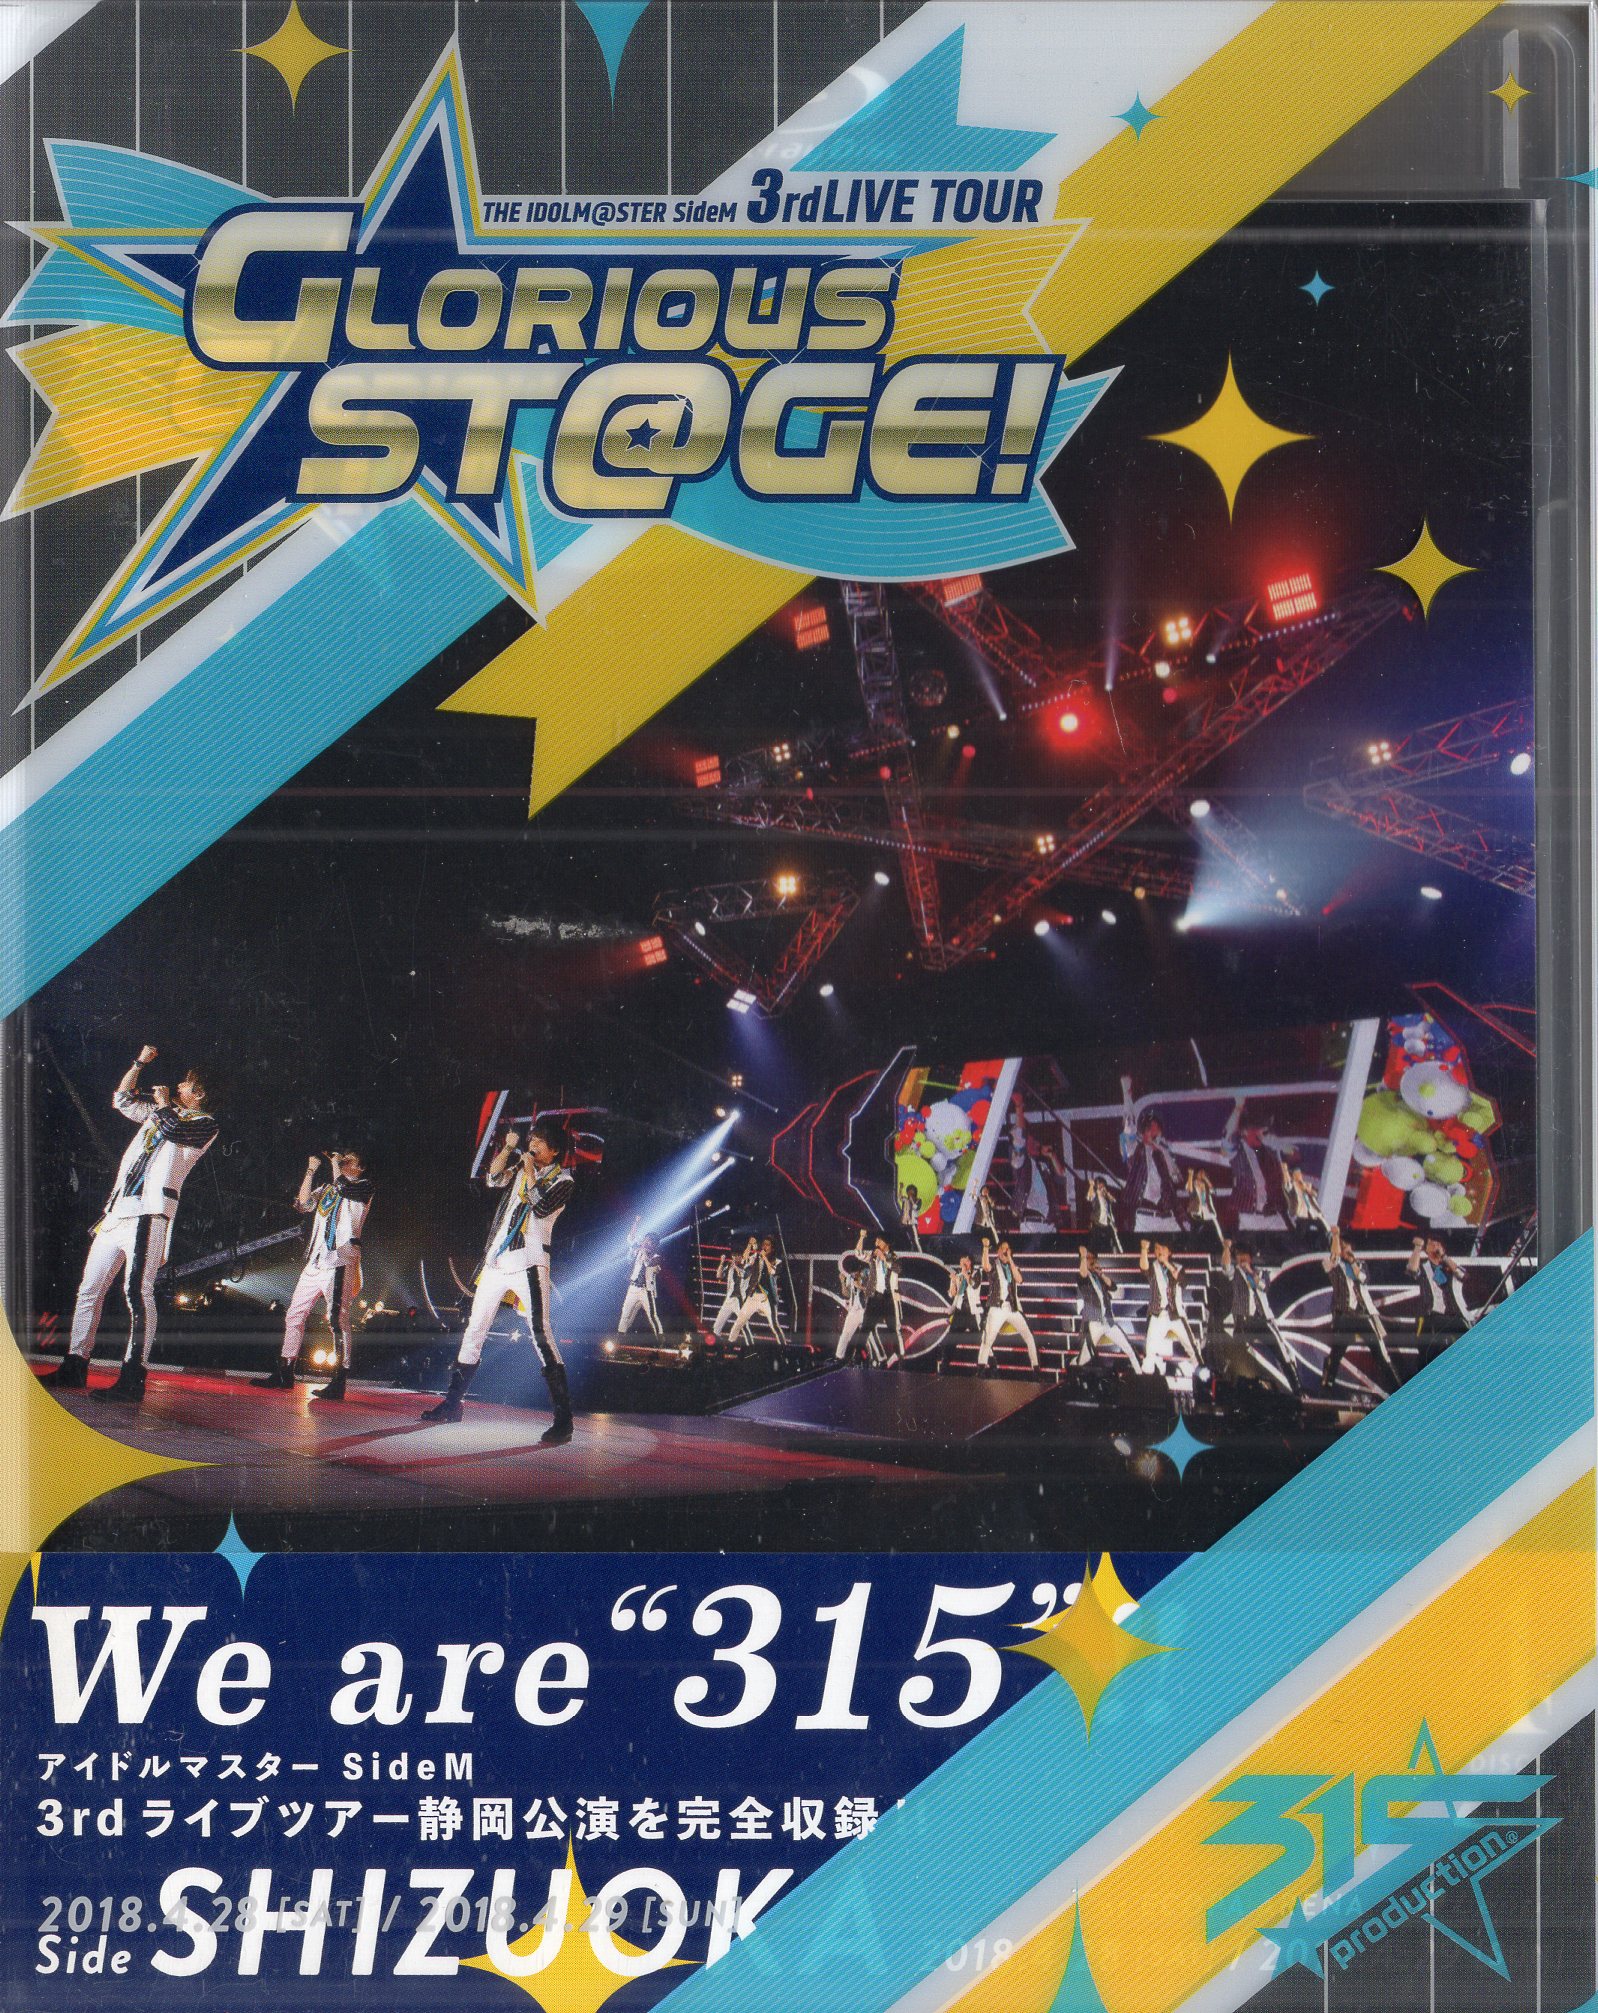 THE IDOLM@STER SideM 3rdLIVE TOUR